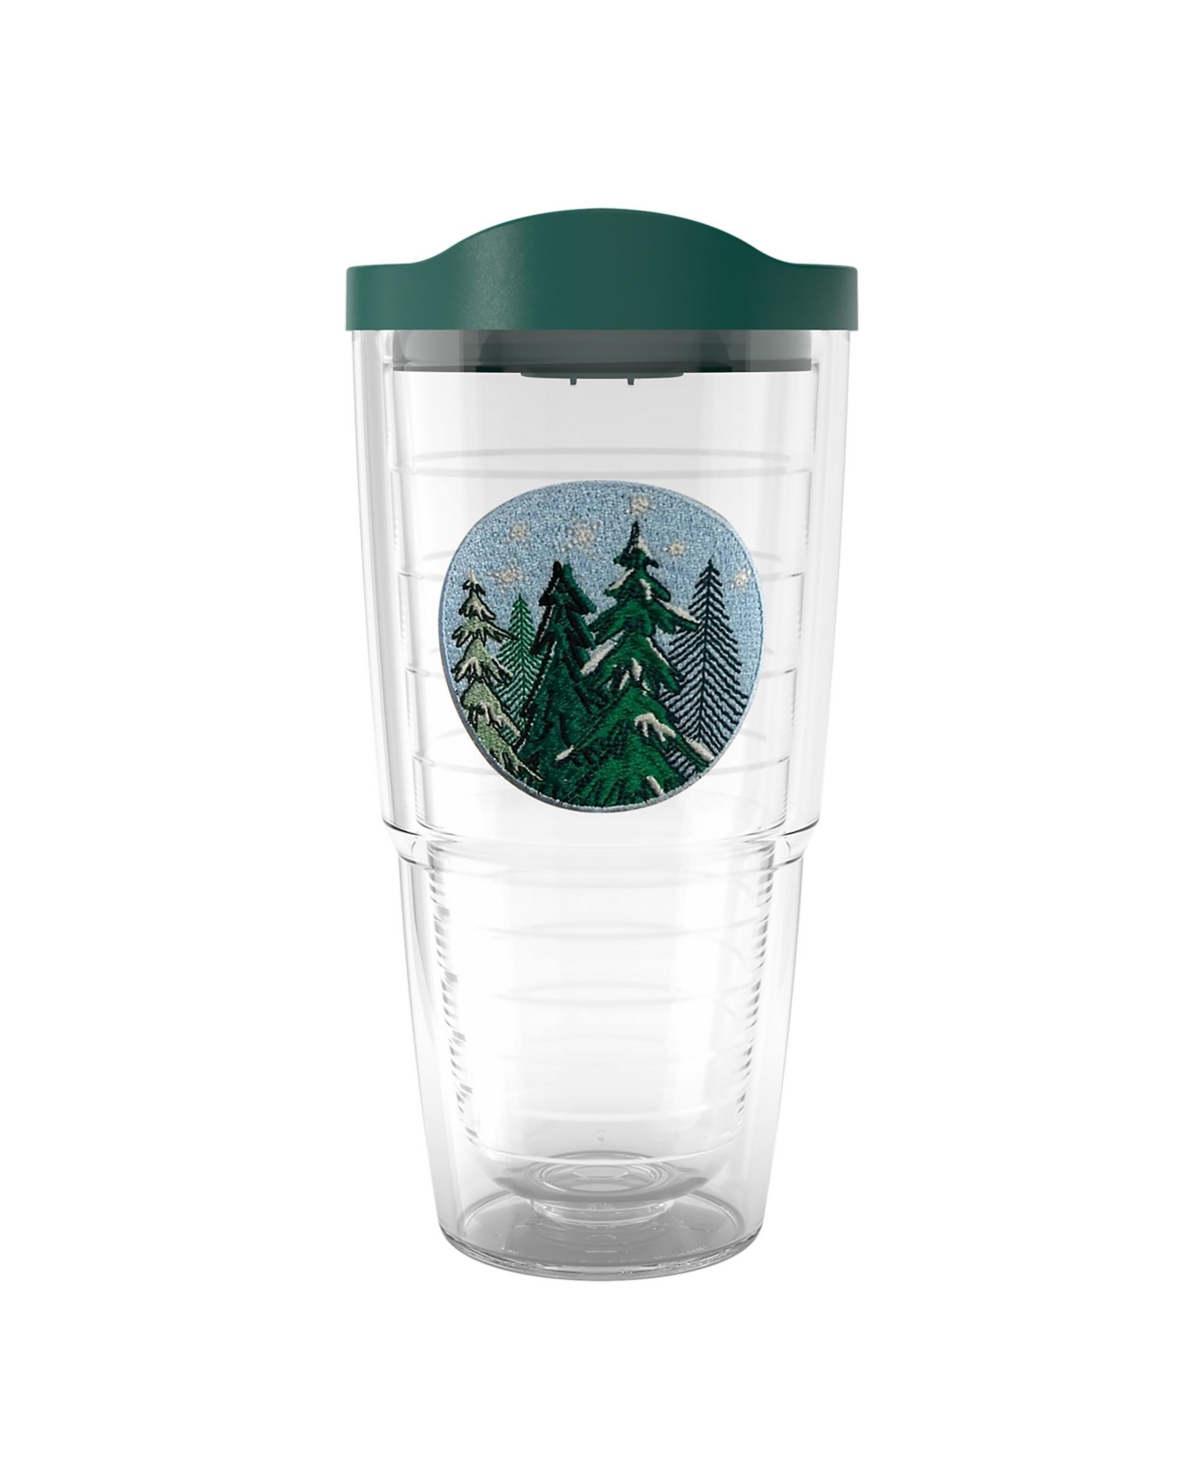 Tervis Tumbler Tervis Spruced Up Christmas Holiday Made In Usa Double Walled Insulated Tumbler Travel Cup Keeps Dri In Open Miscellaneous